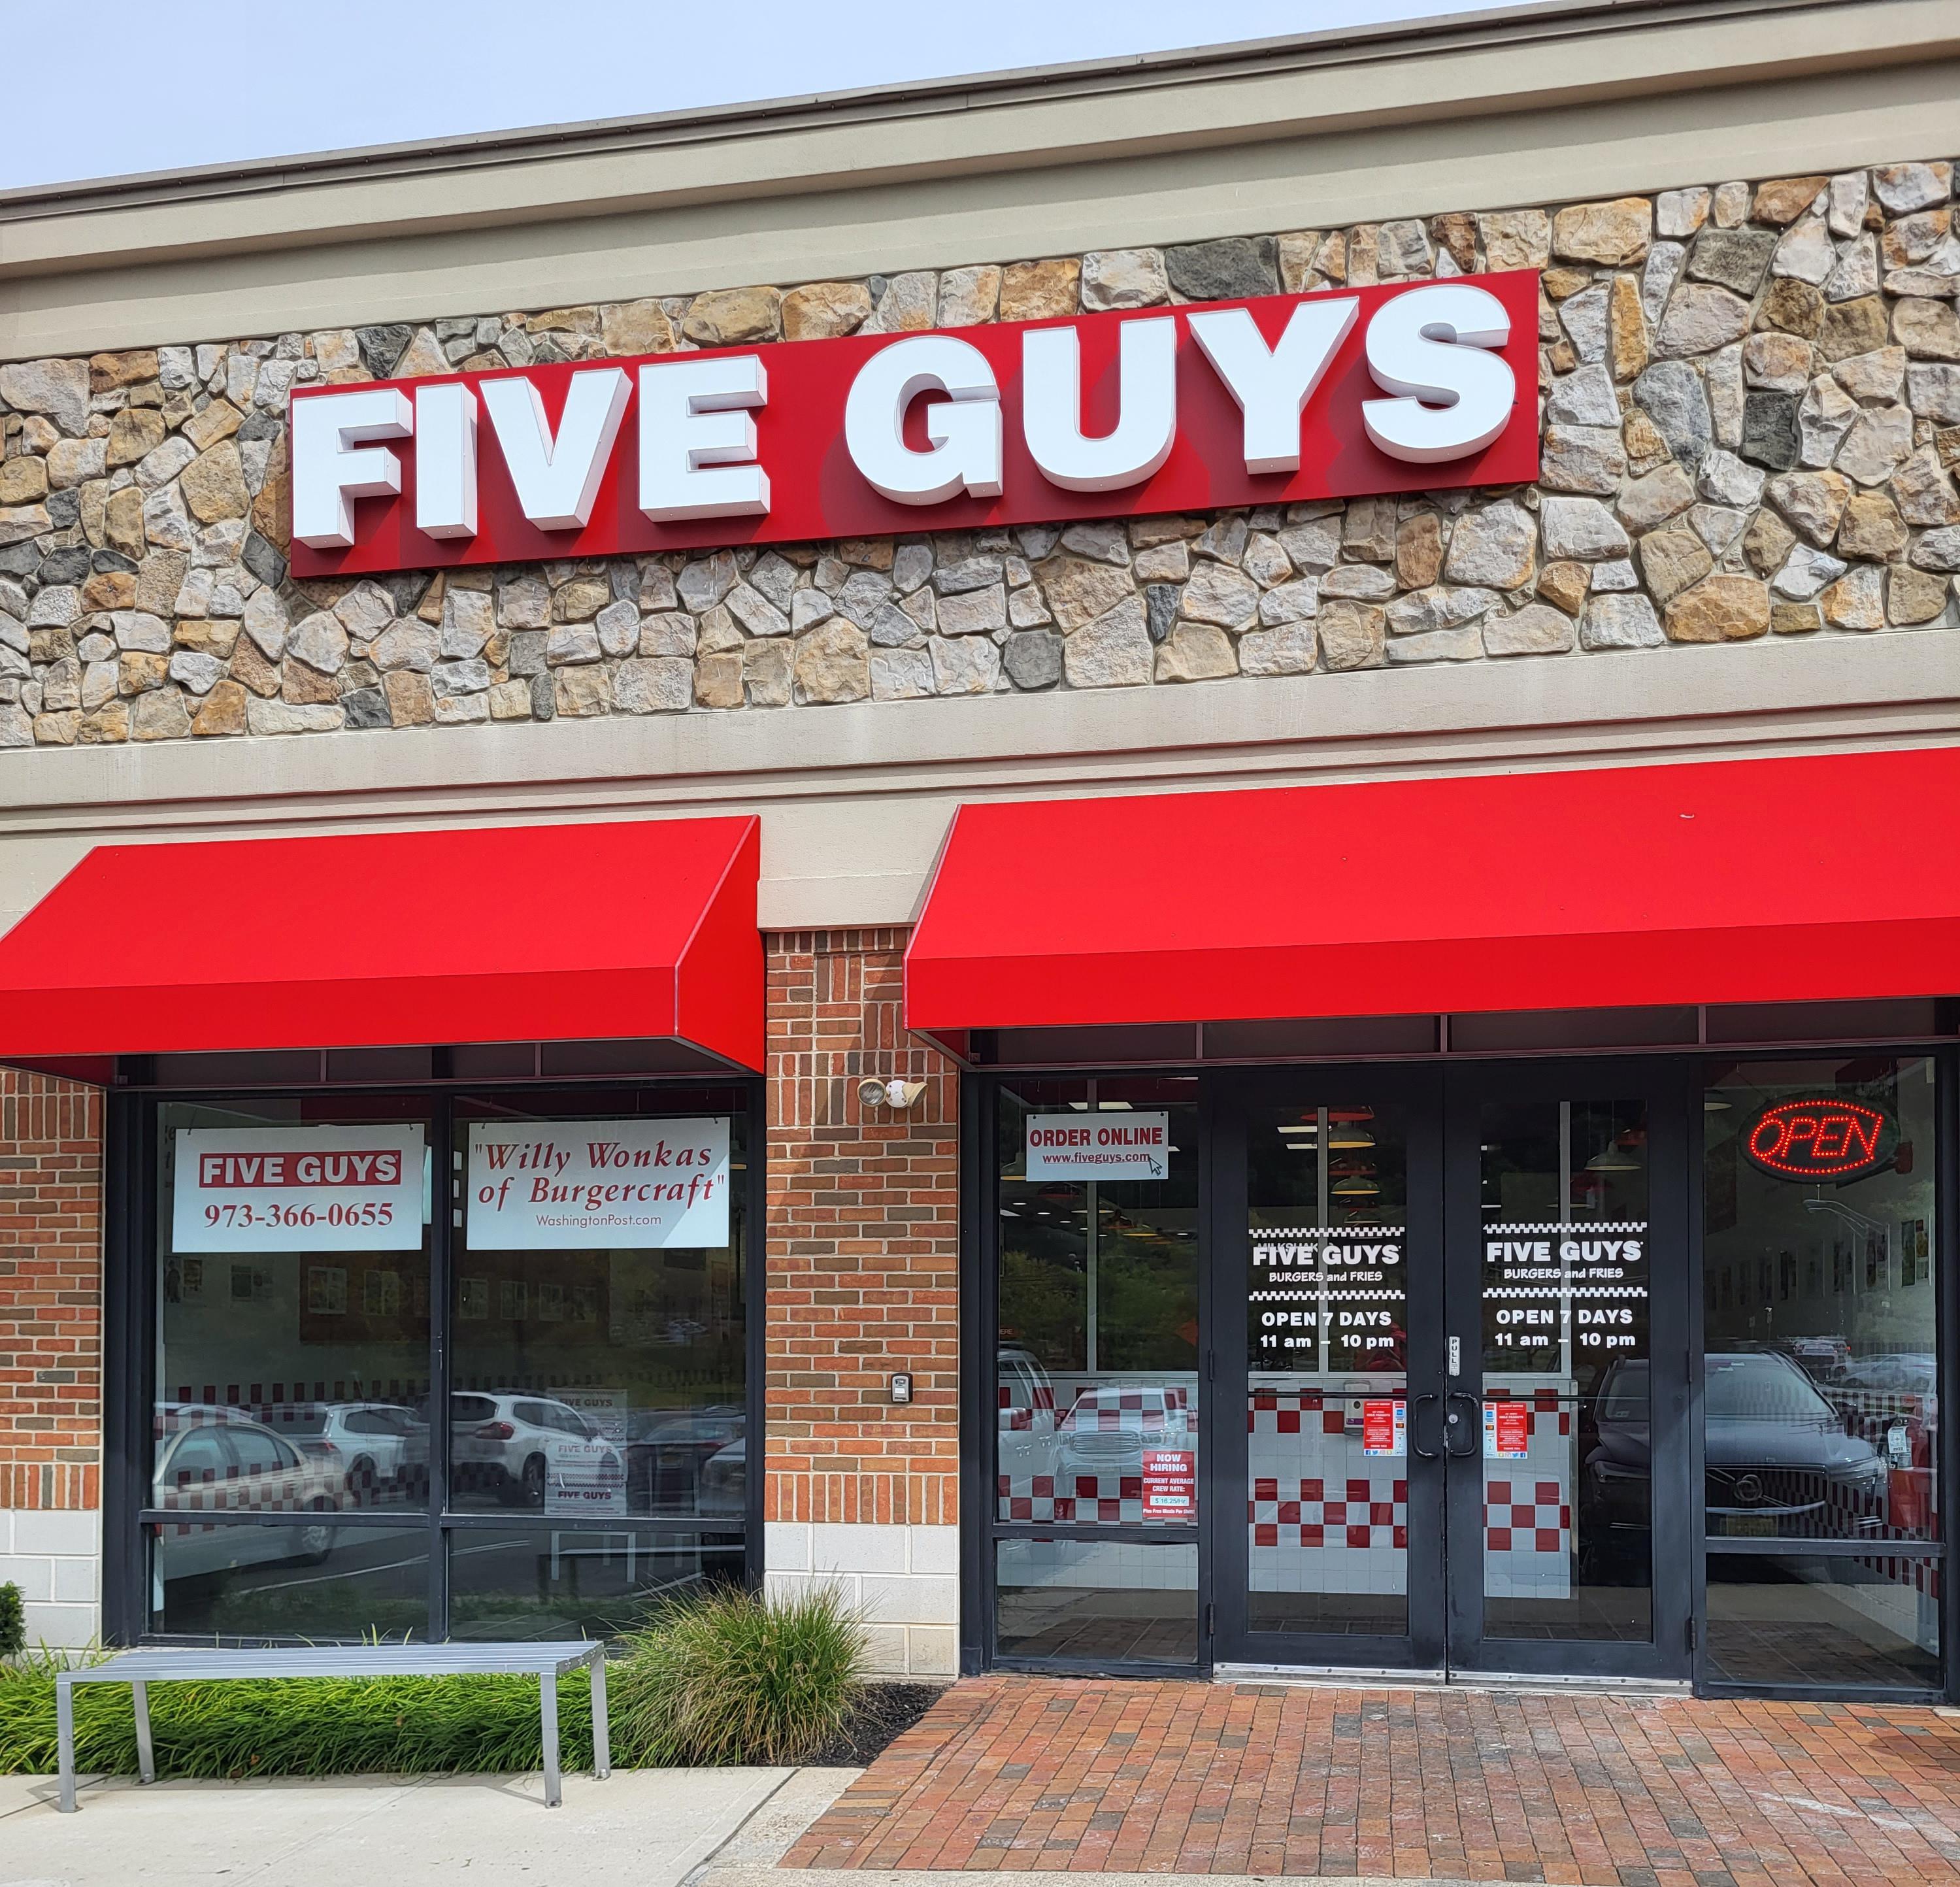 Entrance to the Five Guys restaurant at 3056 Route 10 West in Denville, New Jersey.